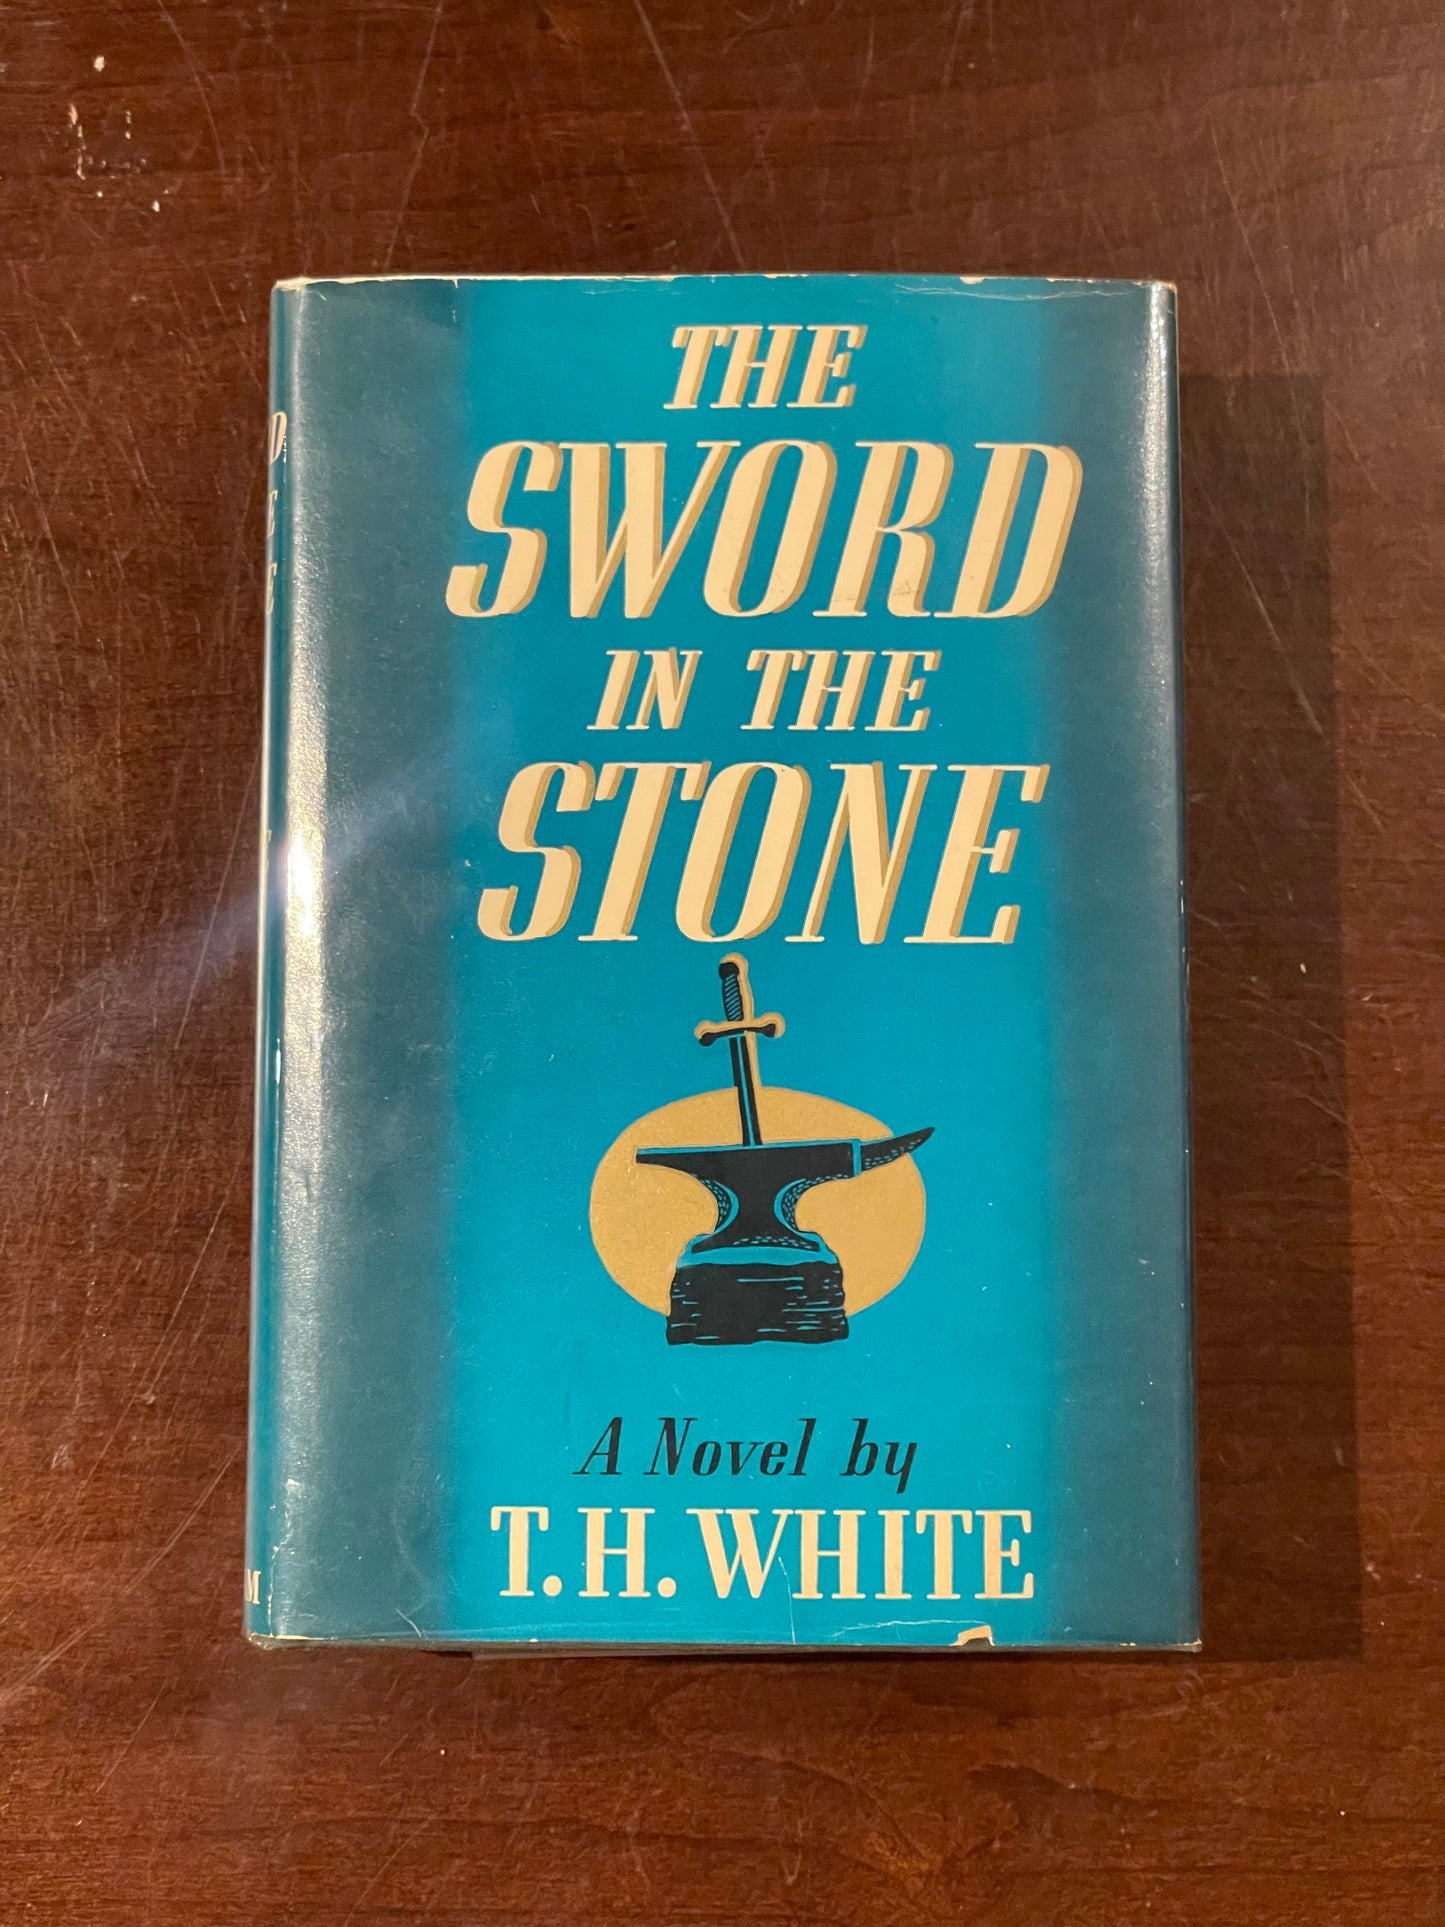 The Sword in The Stone by T.H. White (First Edition)